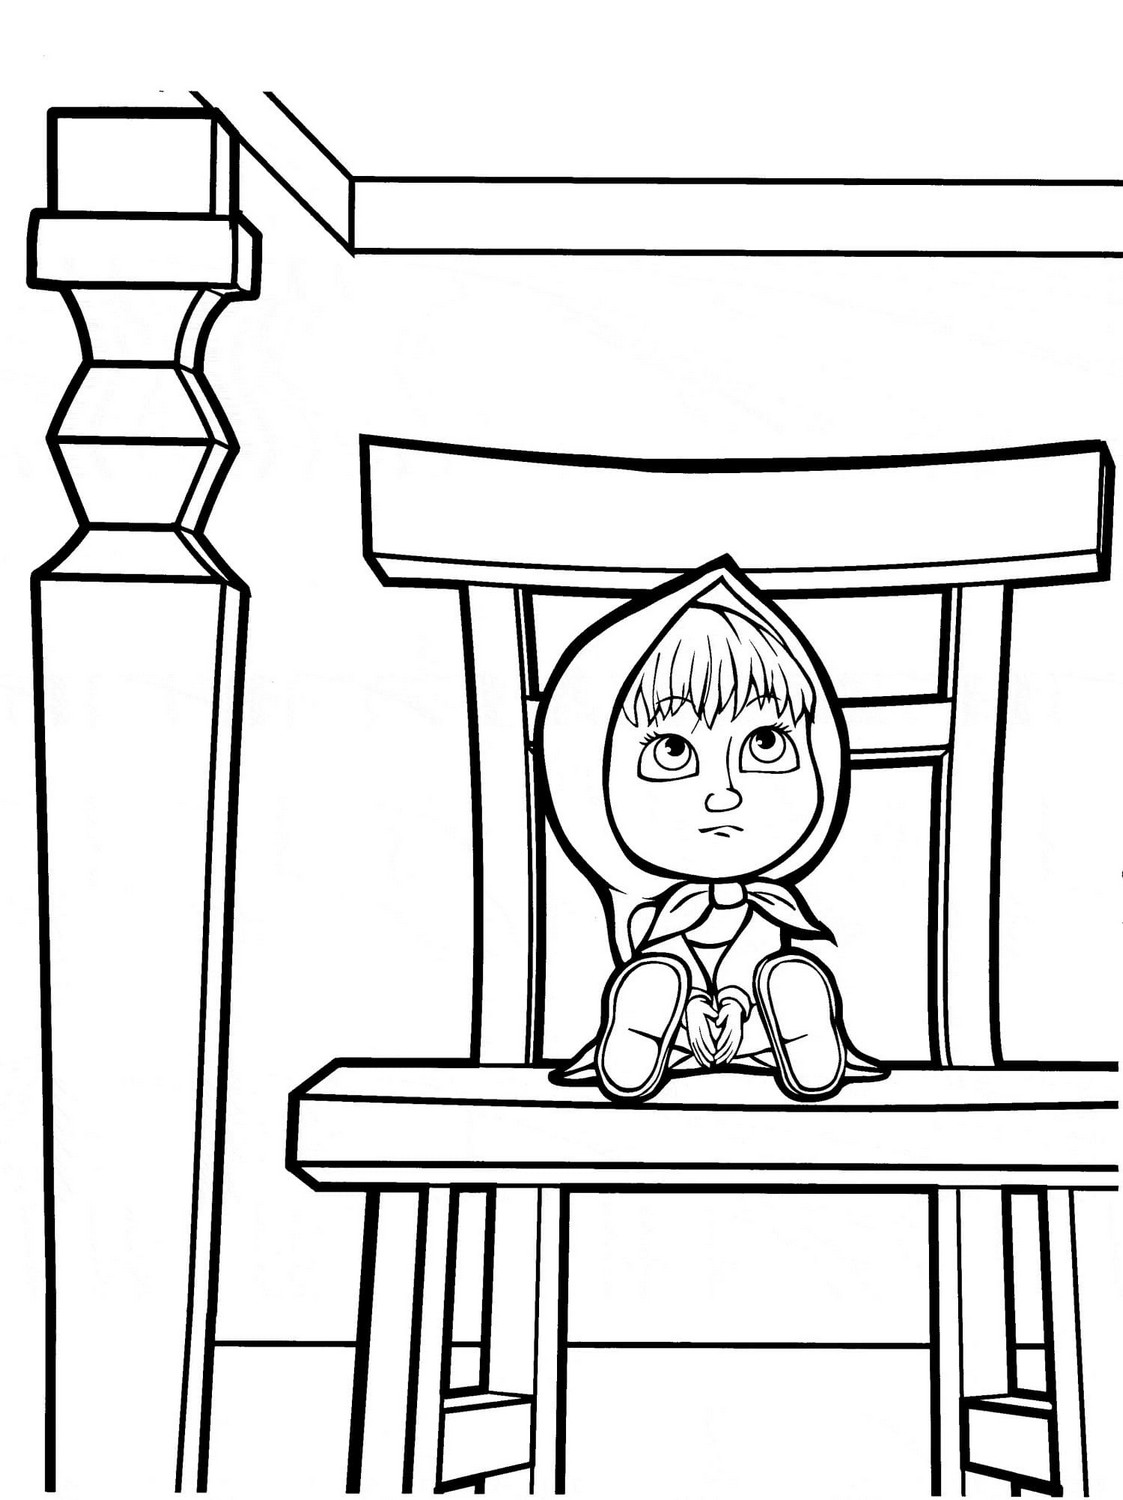 Drawing 09 of Masha and the Bear to print and color